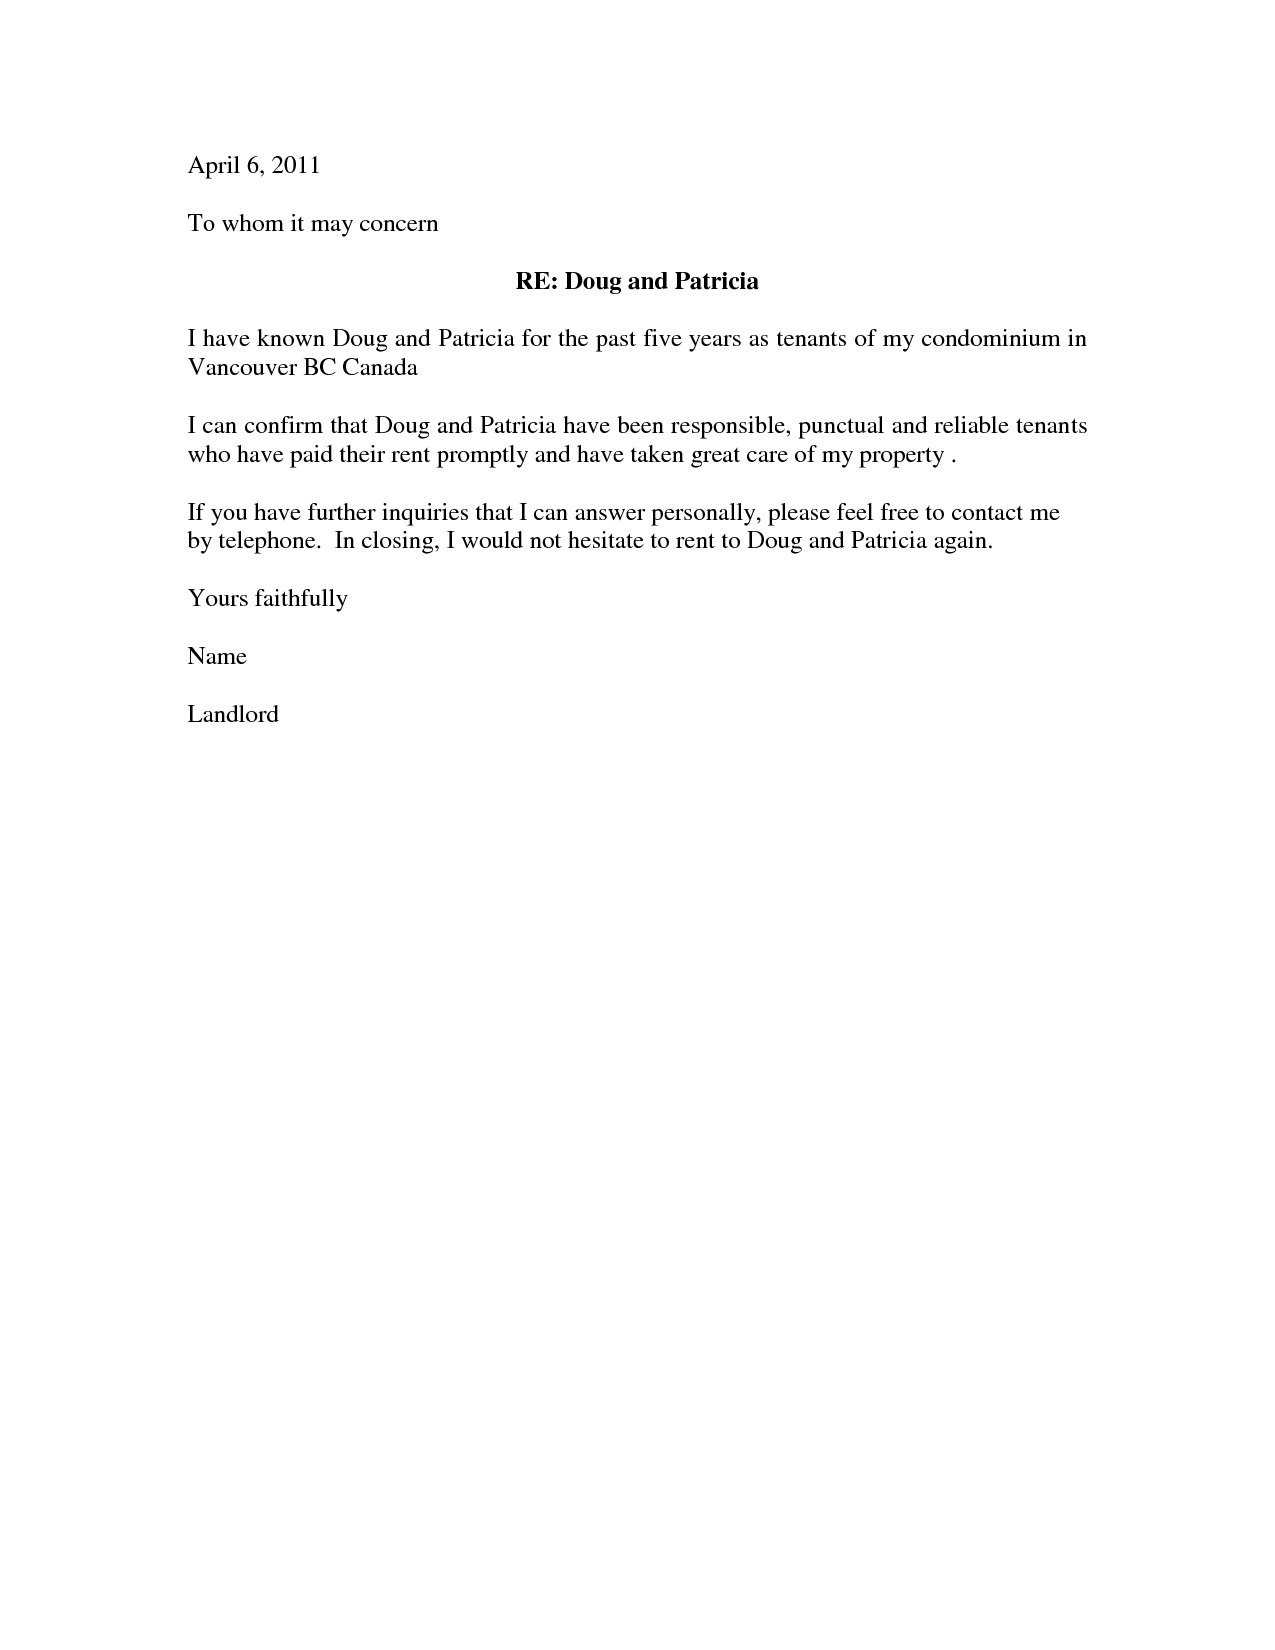 Rental Reference Letter Template - Housing Reference Letter Letter format formal Sample